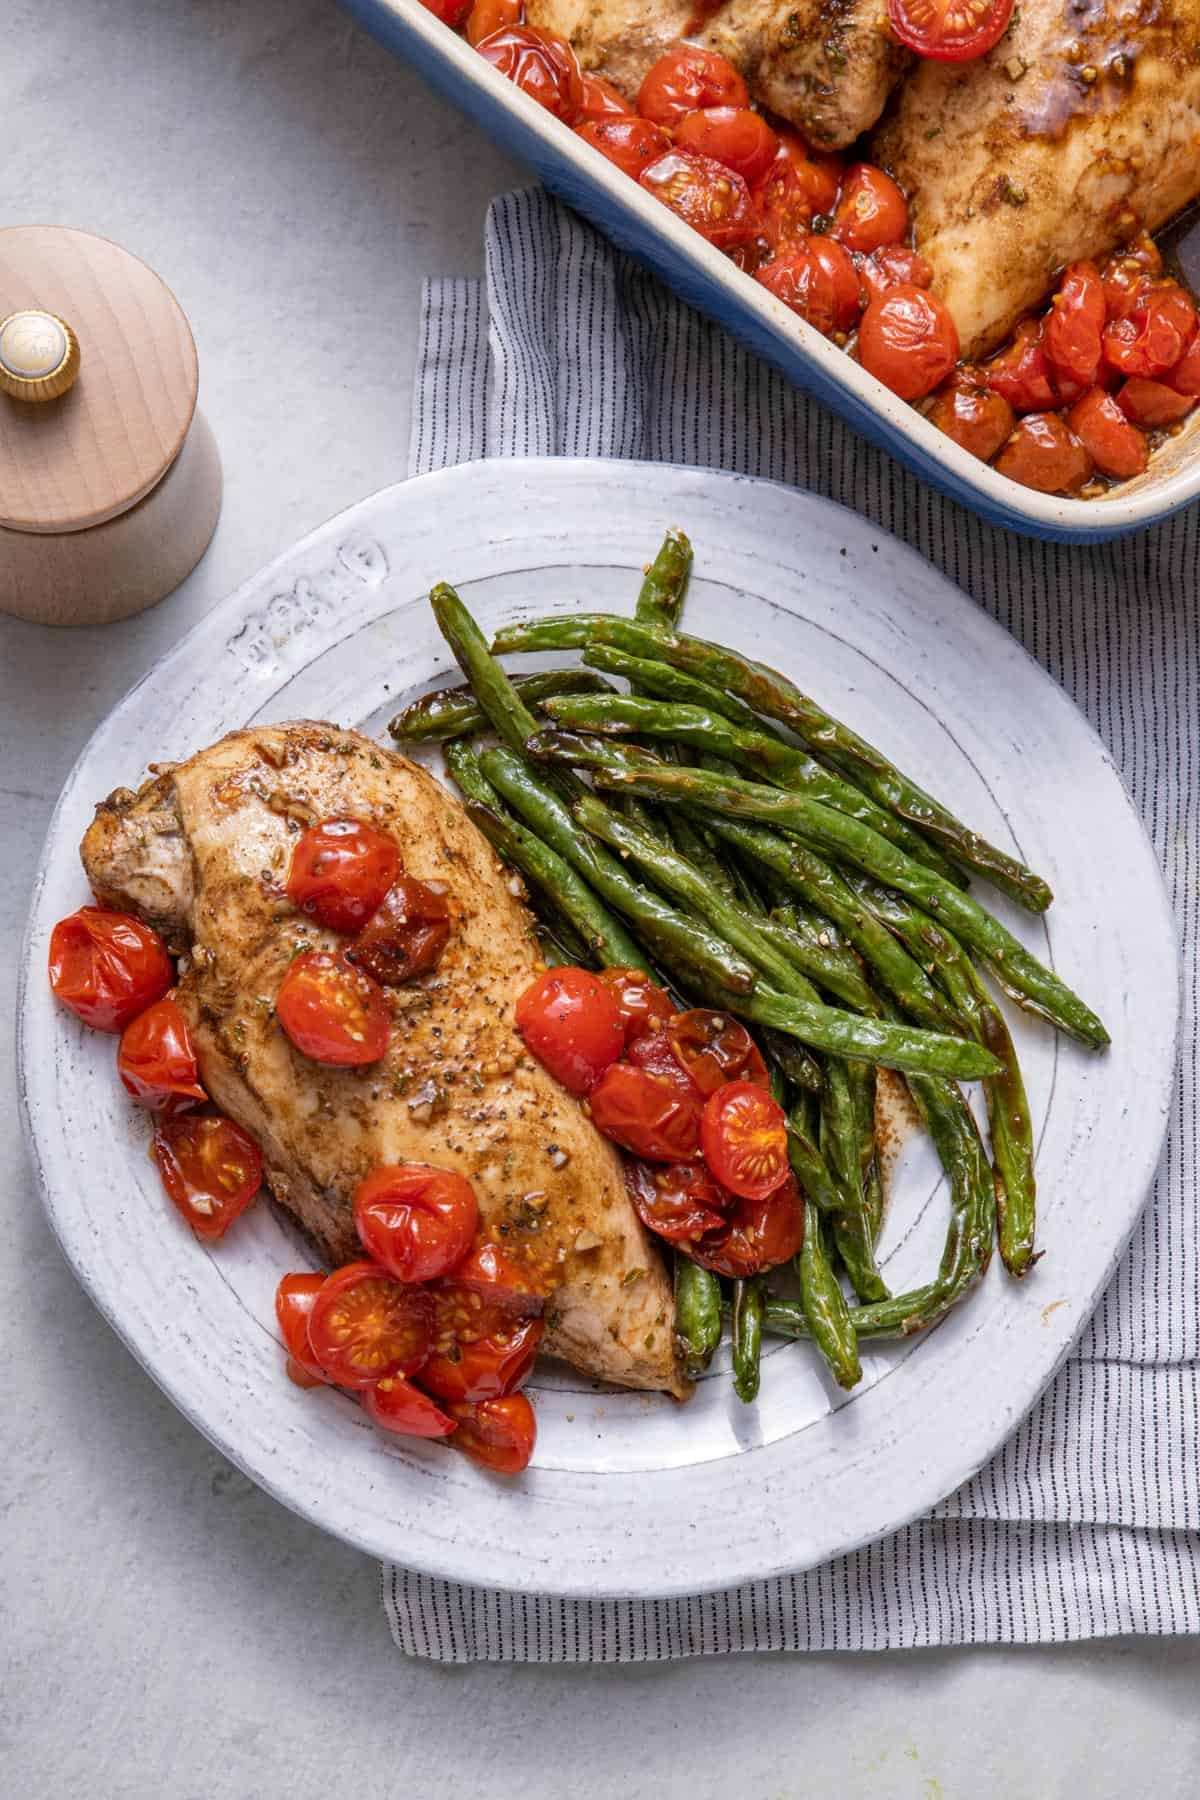 Plate of baked balsamic chicken